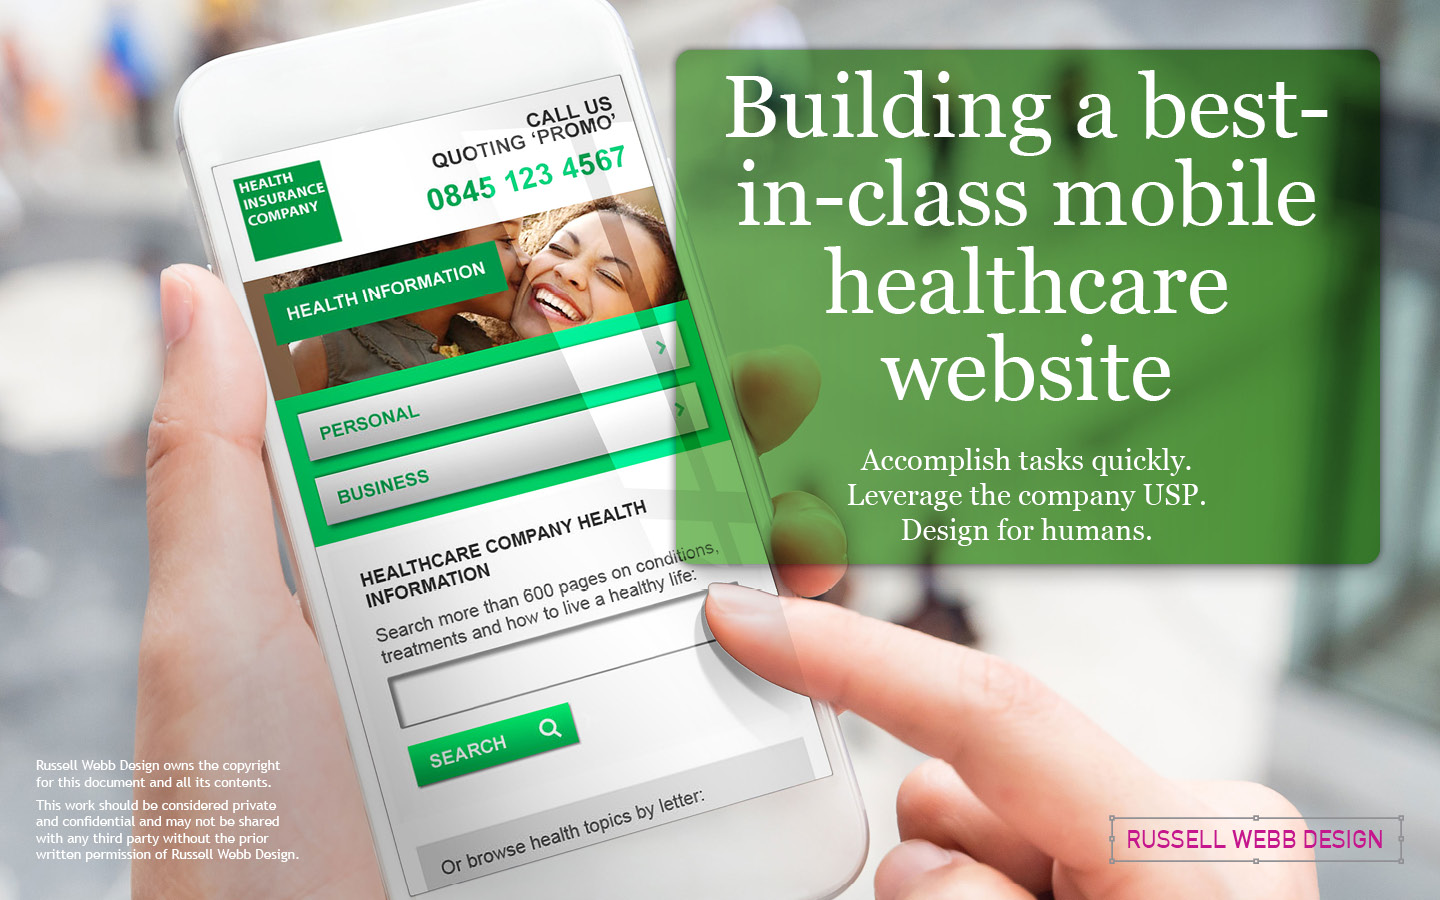 Design and create a ‘best-in-class’ mobile web site